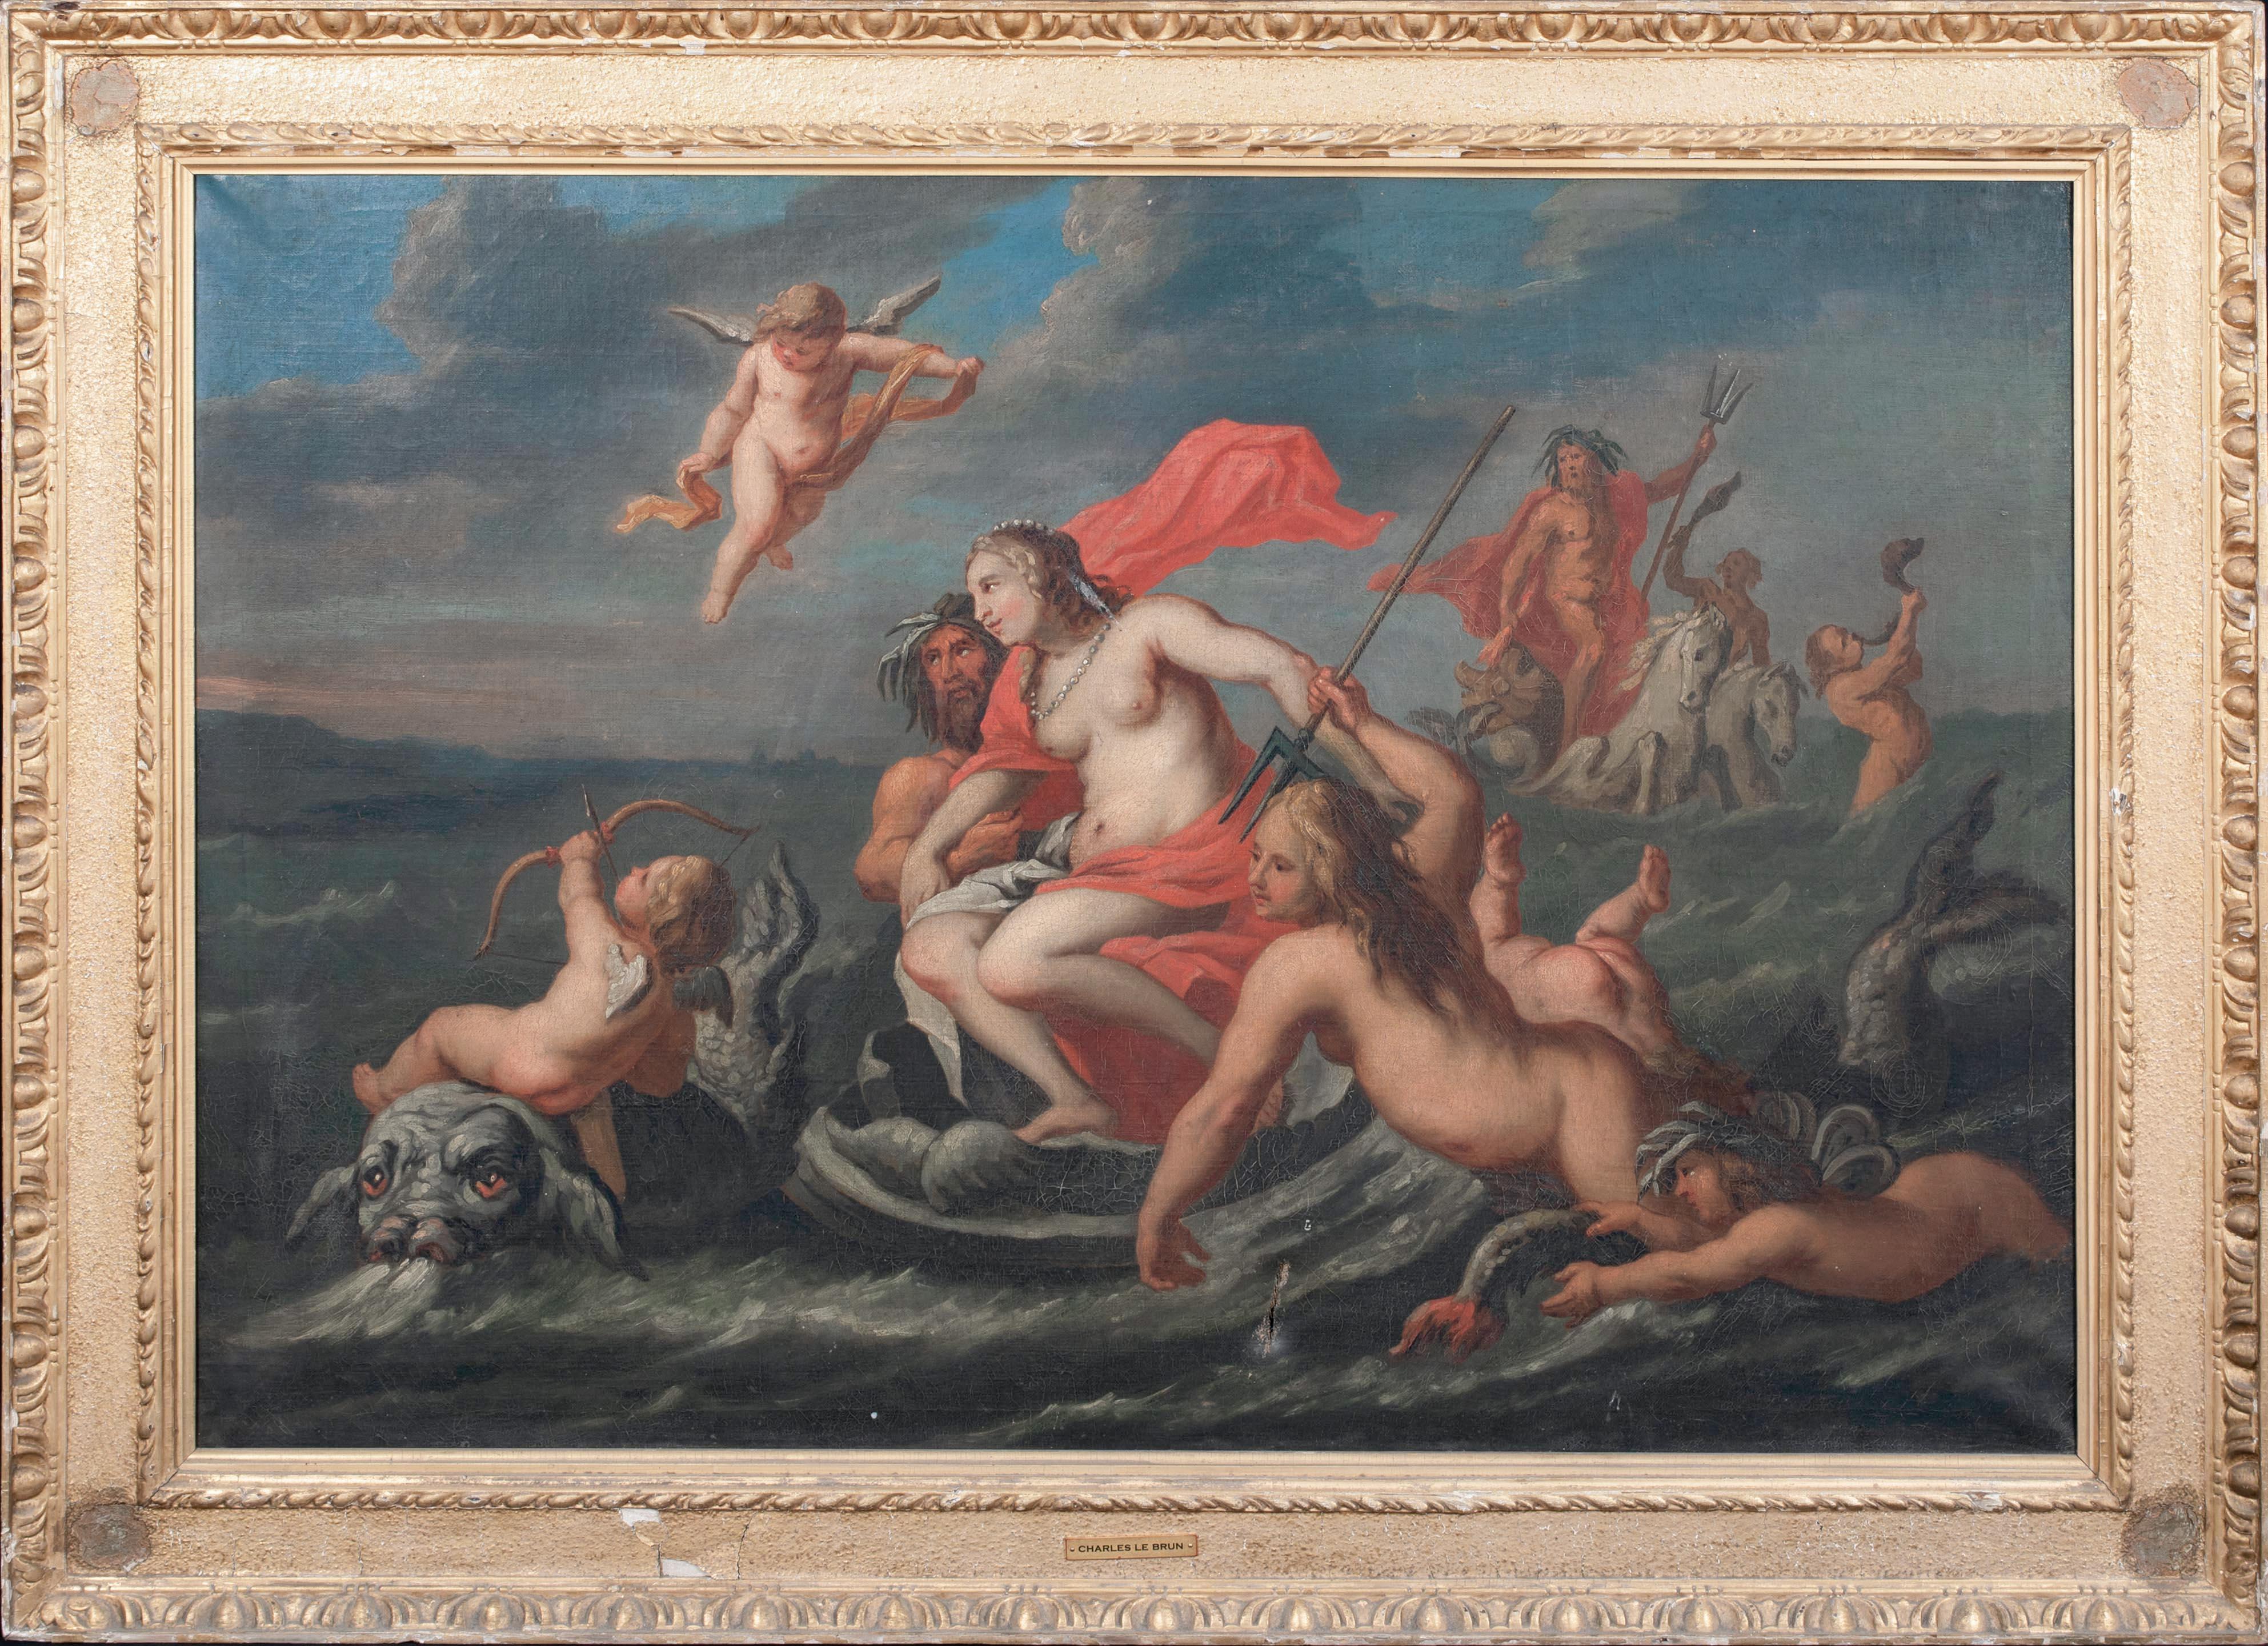  The Triumph Of Galatea, 17th Century  Attributed to Charles Le Brun (1619-1690)